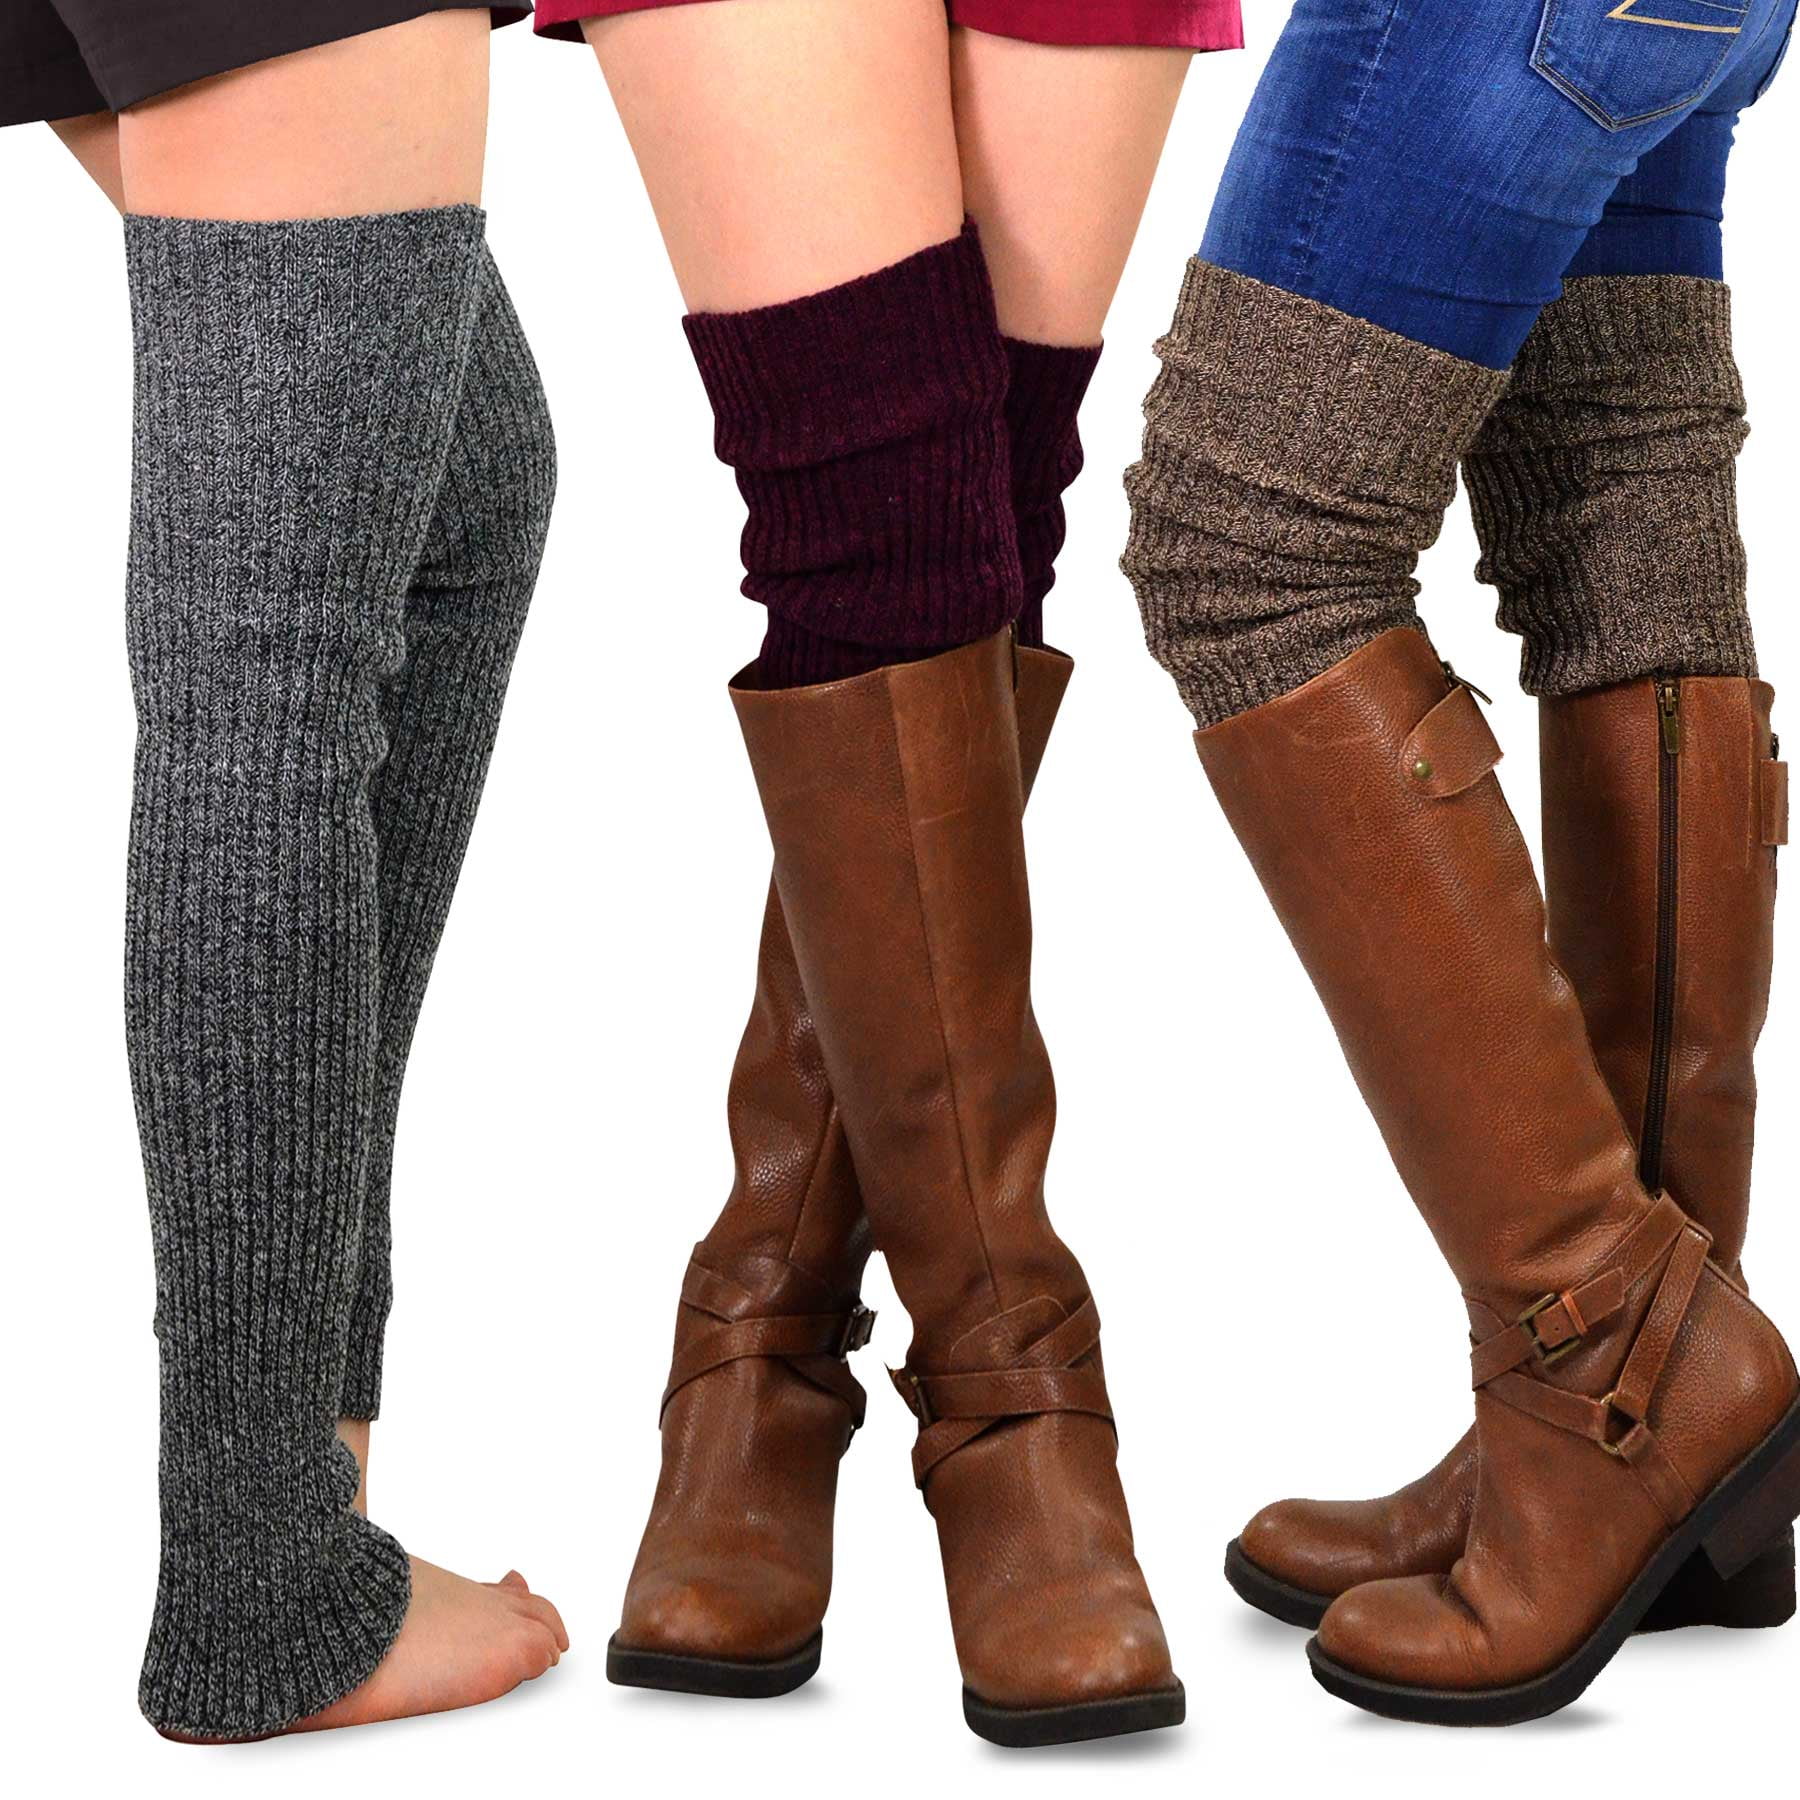 TeeHee Knee Leg Warmers, Extra Long Thigh High Leg Warmers, Boot Cuffs for  Women Multipairs Gift for Her